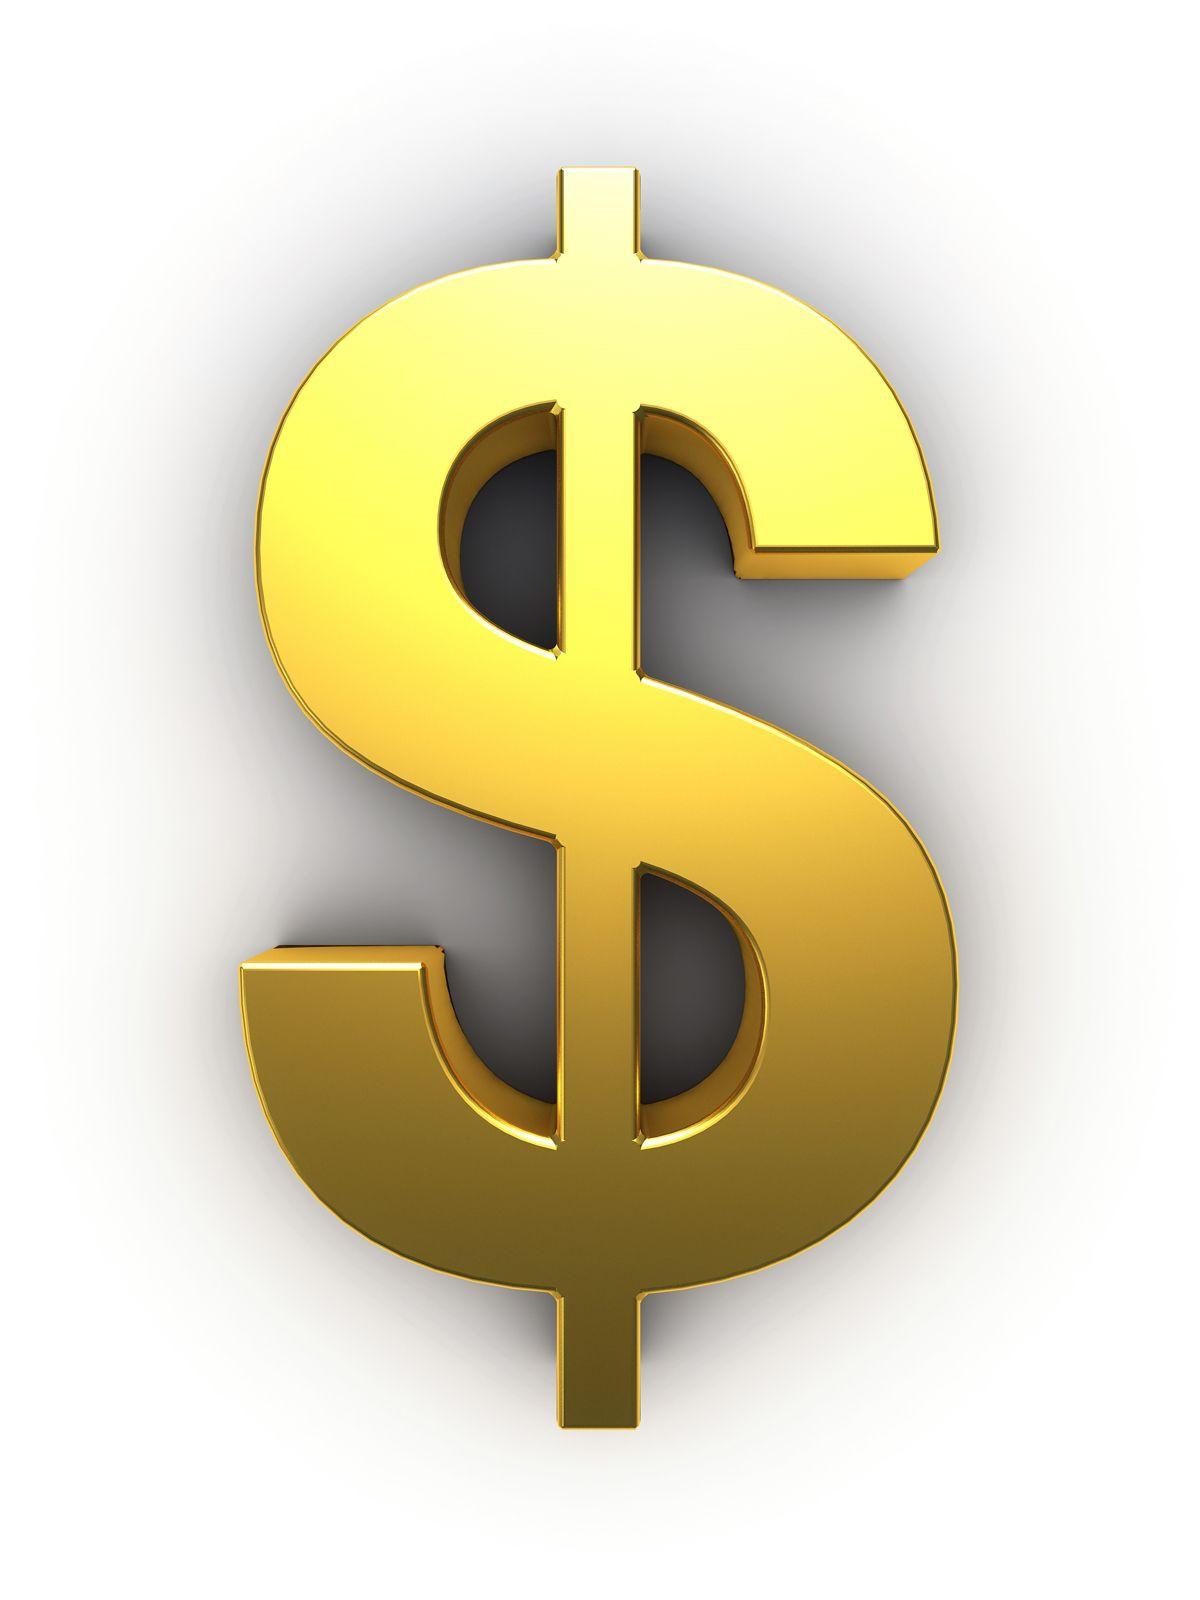 Dollar Sign.. Creators Blog: What does the dollar